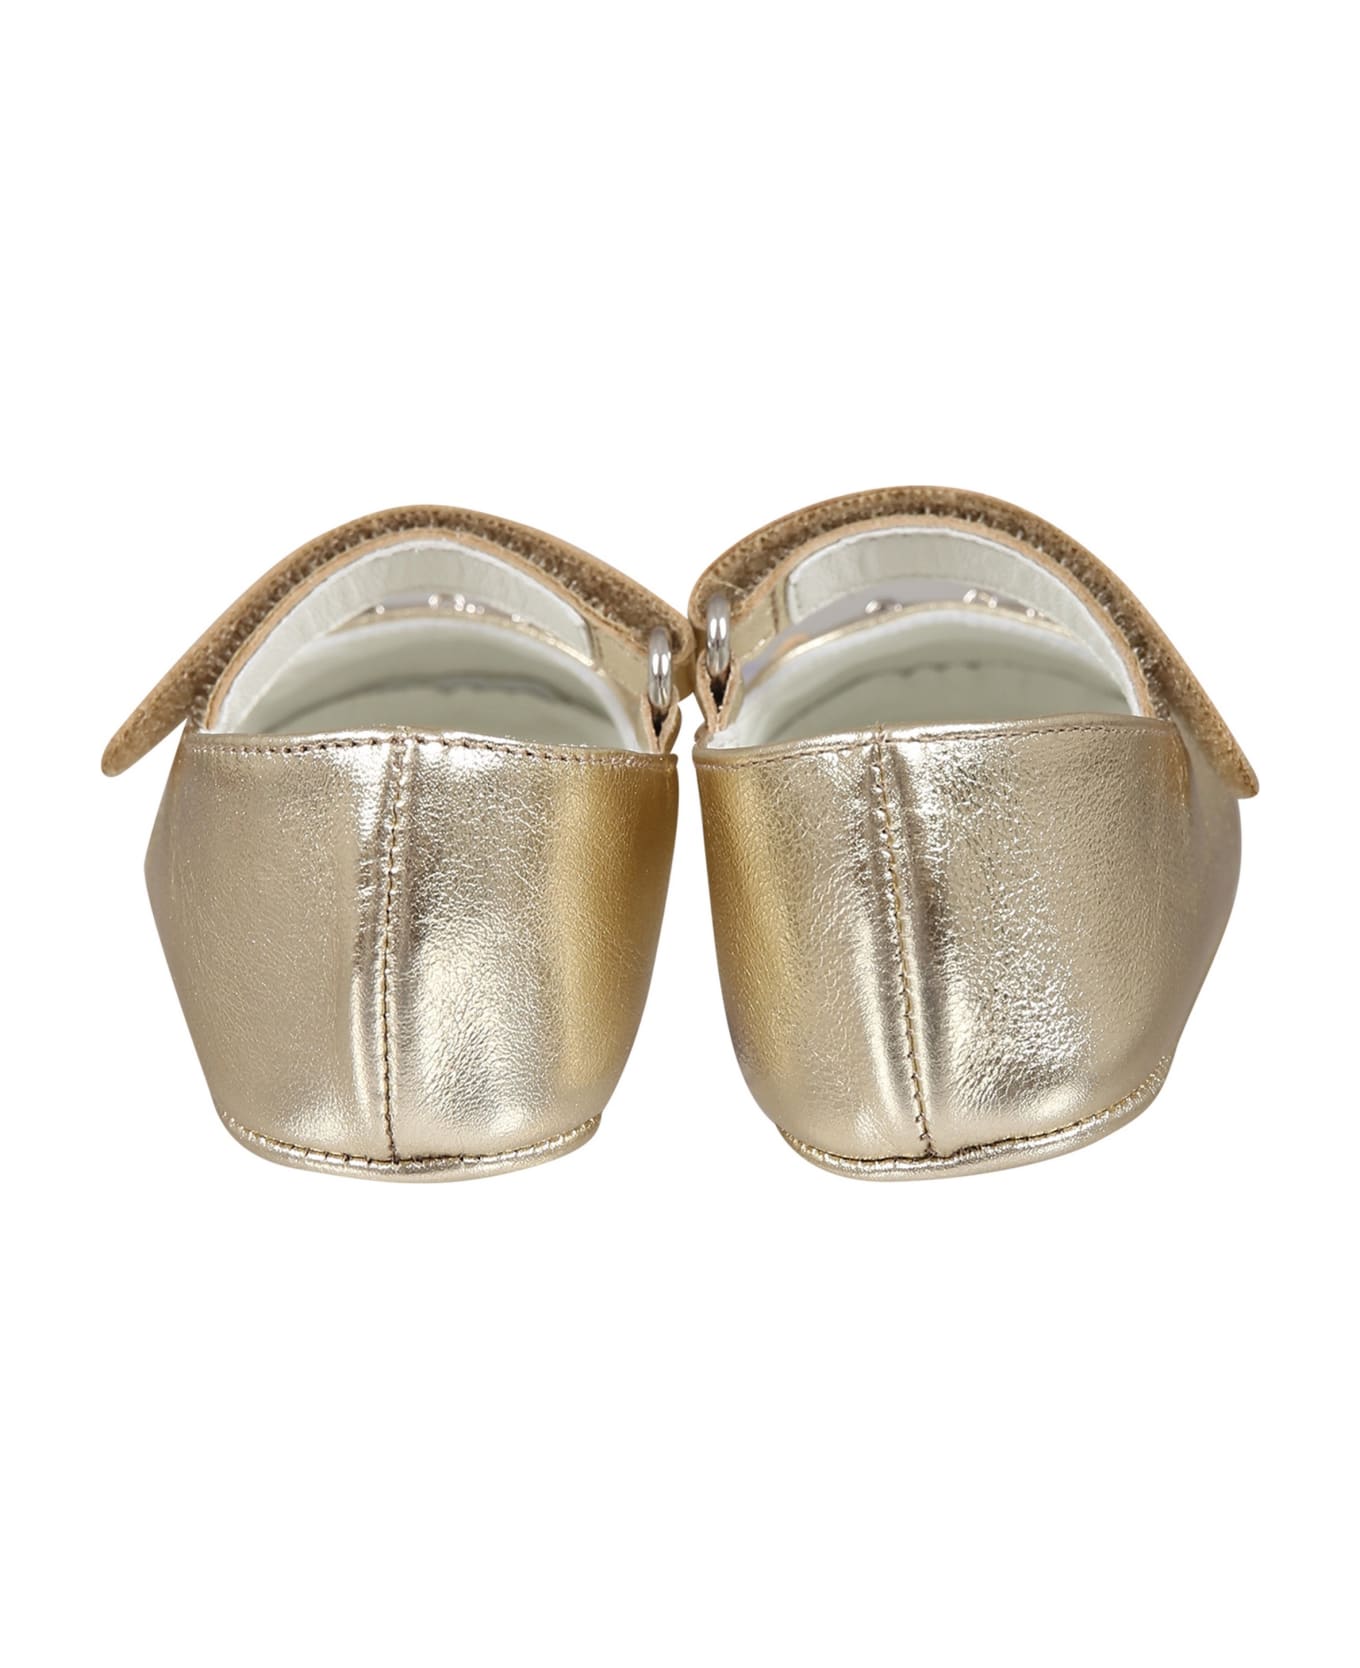 Gucci Gold Ballet Flats For Baby Girl With Horsebit - Gold